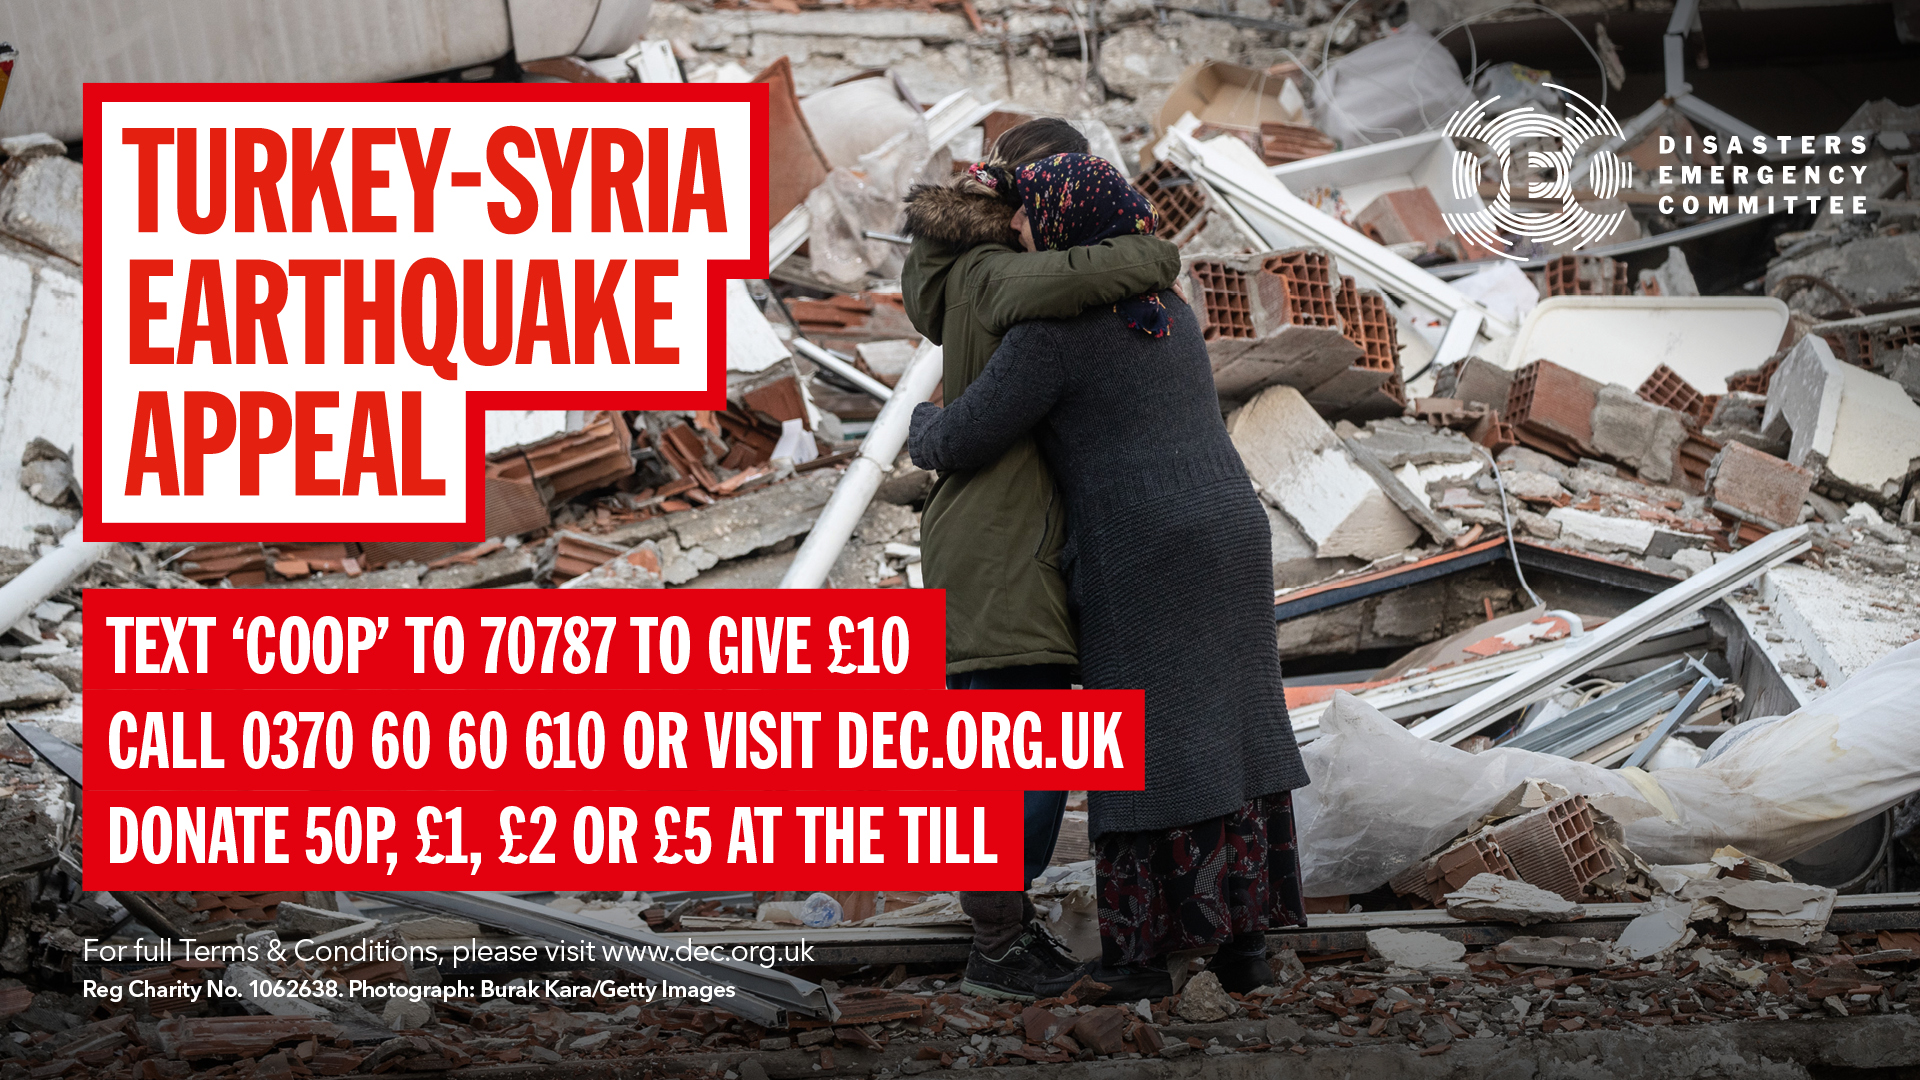 Coop donates £100k to support those impacted by the earthquake in